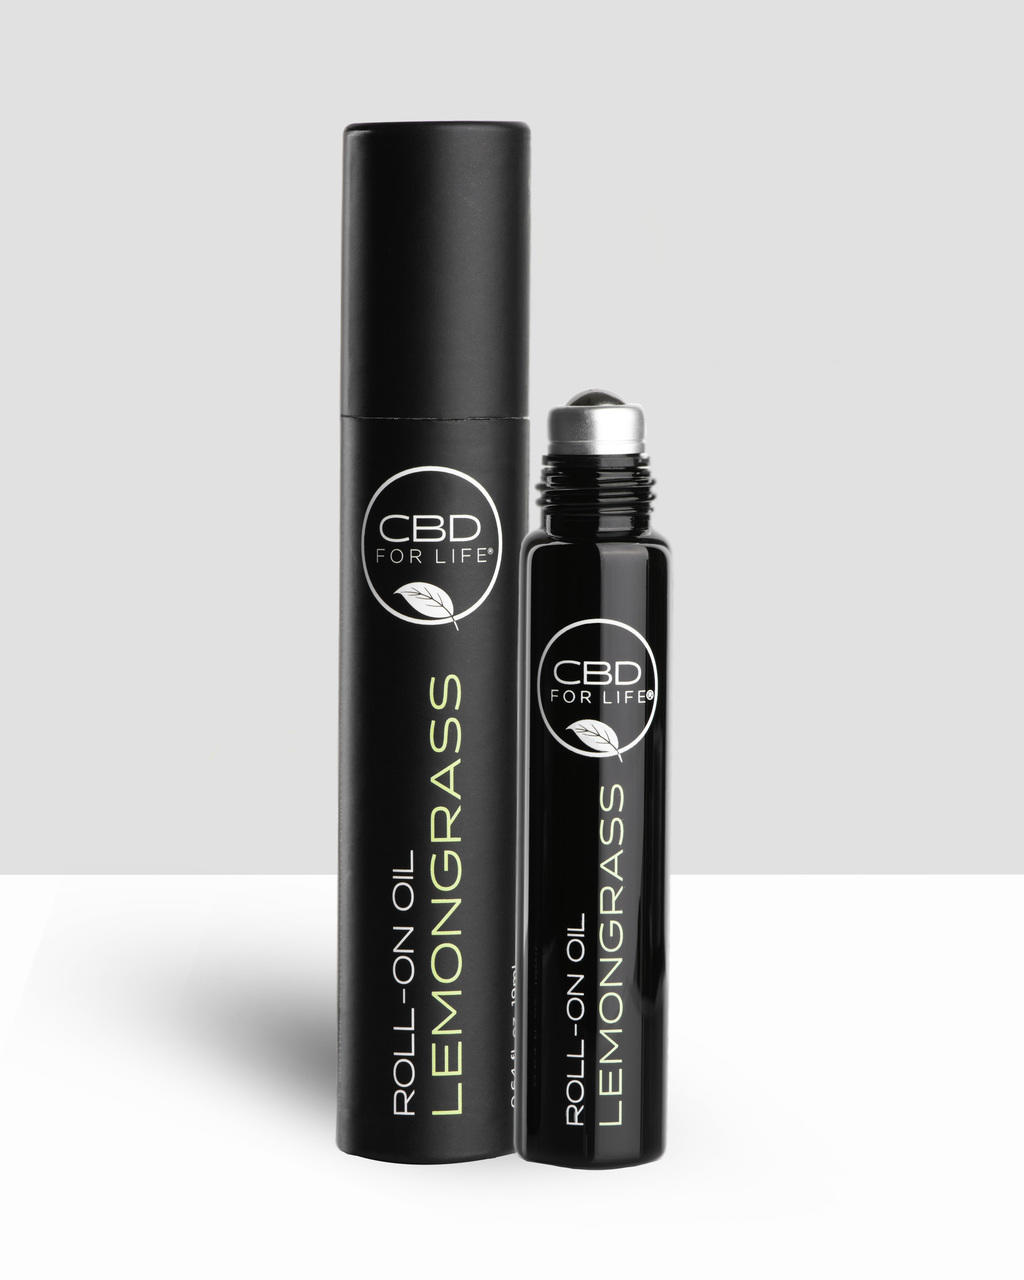 Behold, the CBD Roller Set Oil. Our best CBD product when it comes to targeted pain relief.